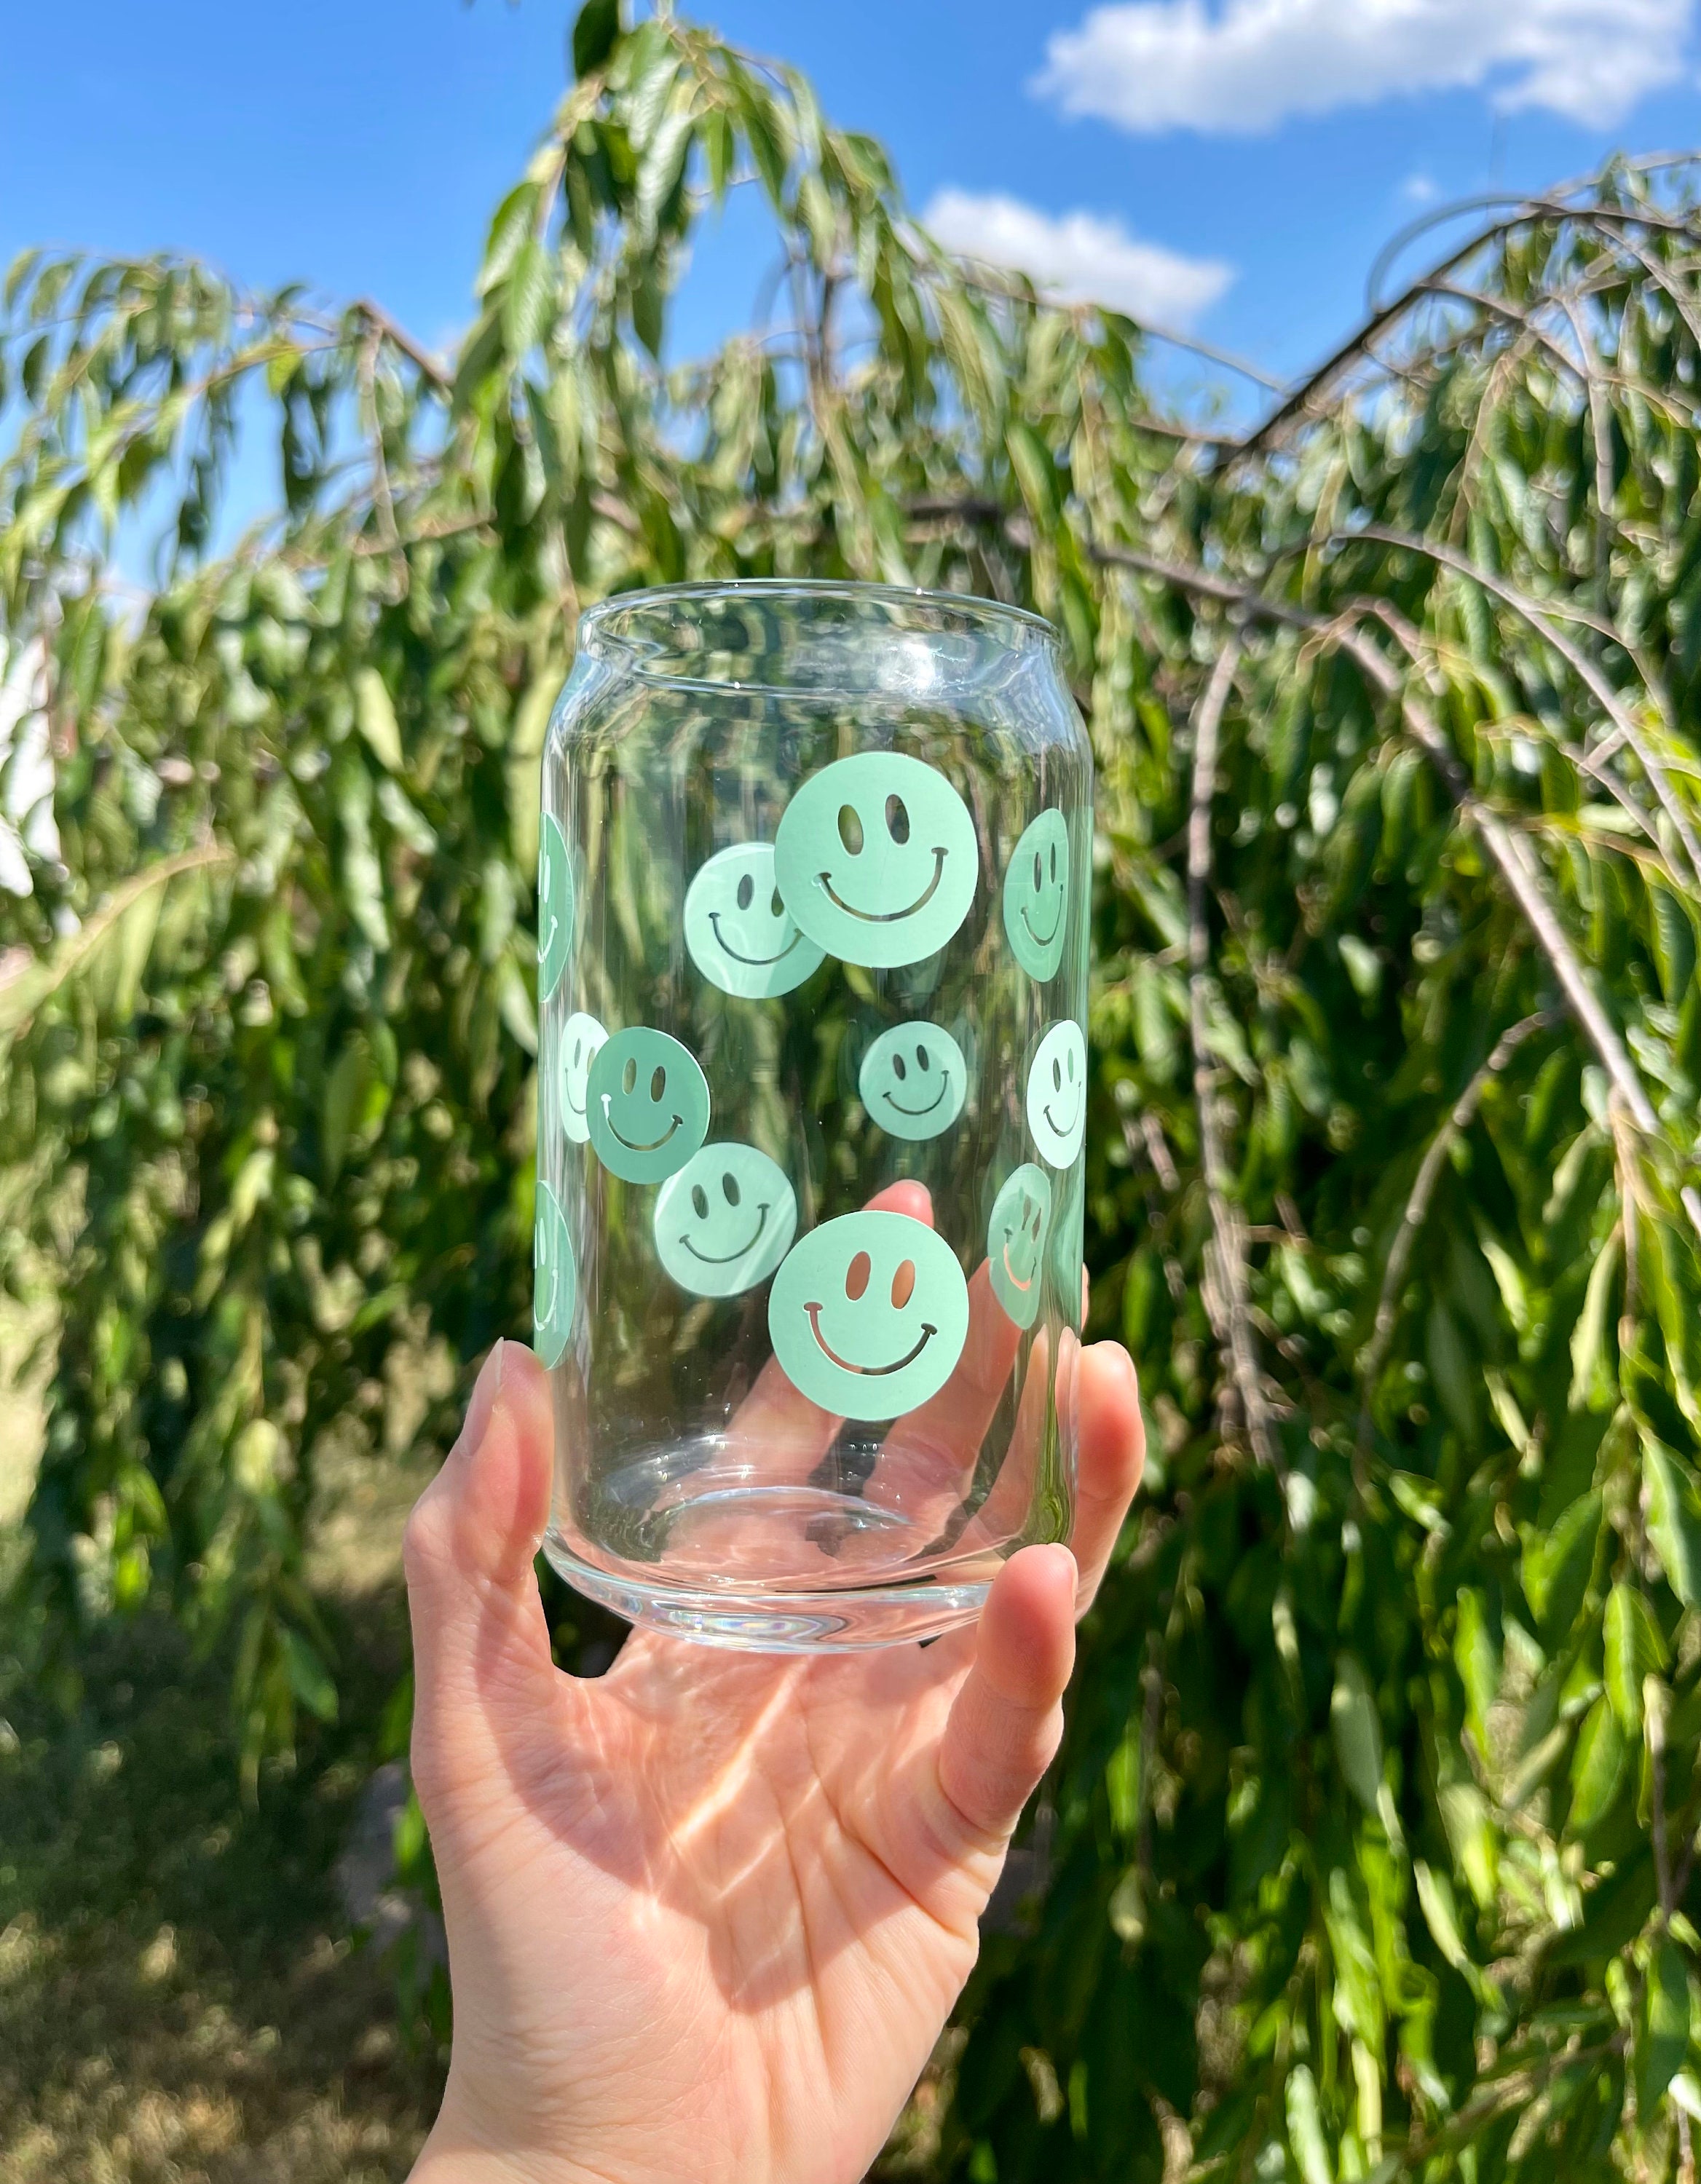 Smiley Iced Coffee Glass Smiley Glass Cup, Soda Can Glasses 16Oz Glass Cups  With Smiley Faces, Boba Glass Cup With Re…